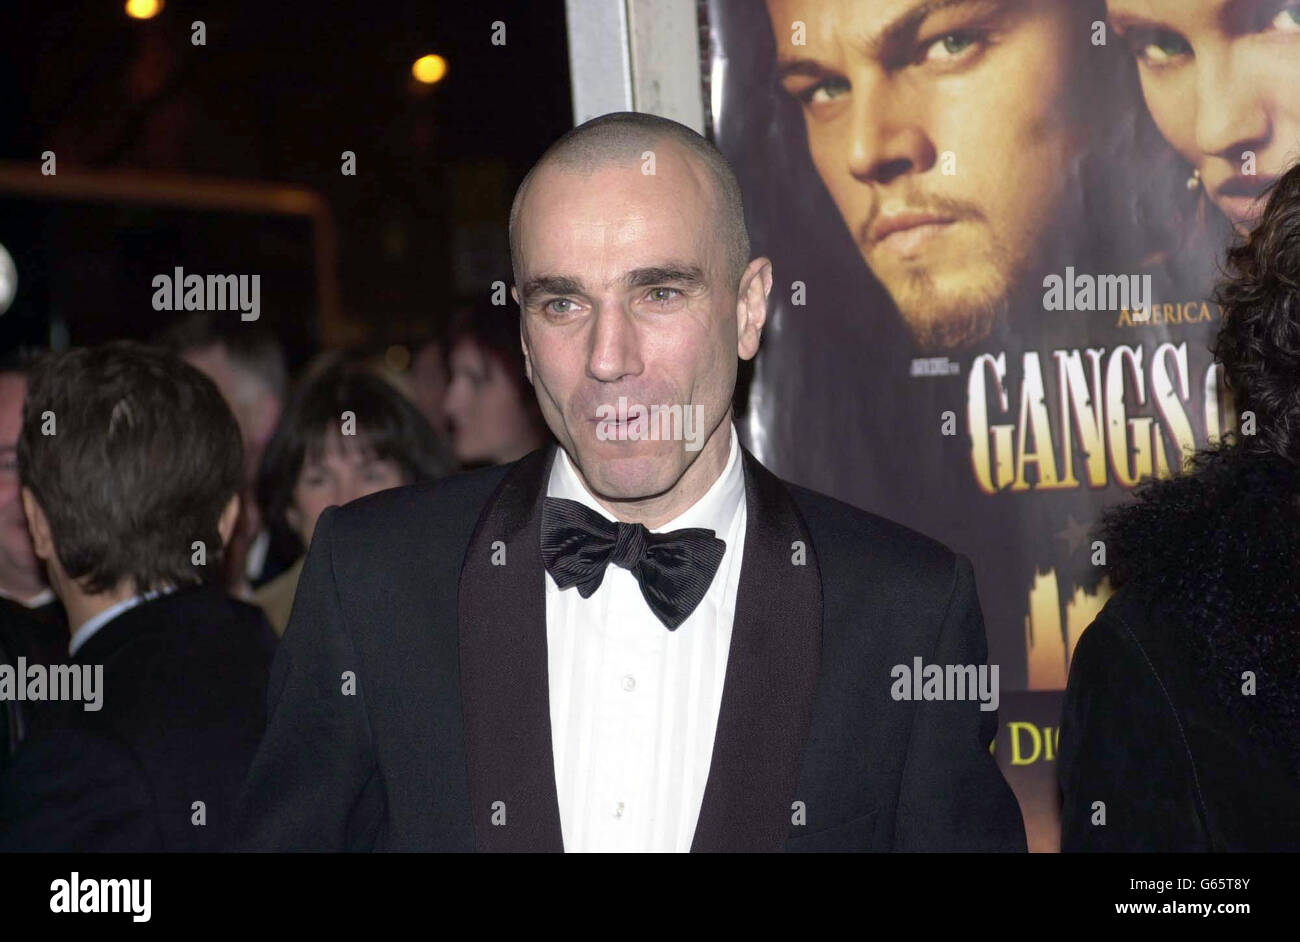 UK premiere of Gangs of New York - The Empire Cinema, Leicester Square, London Stock Photo